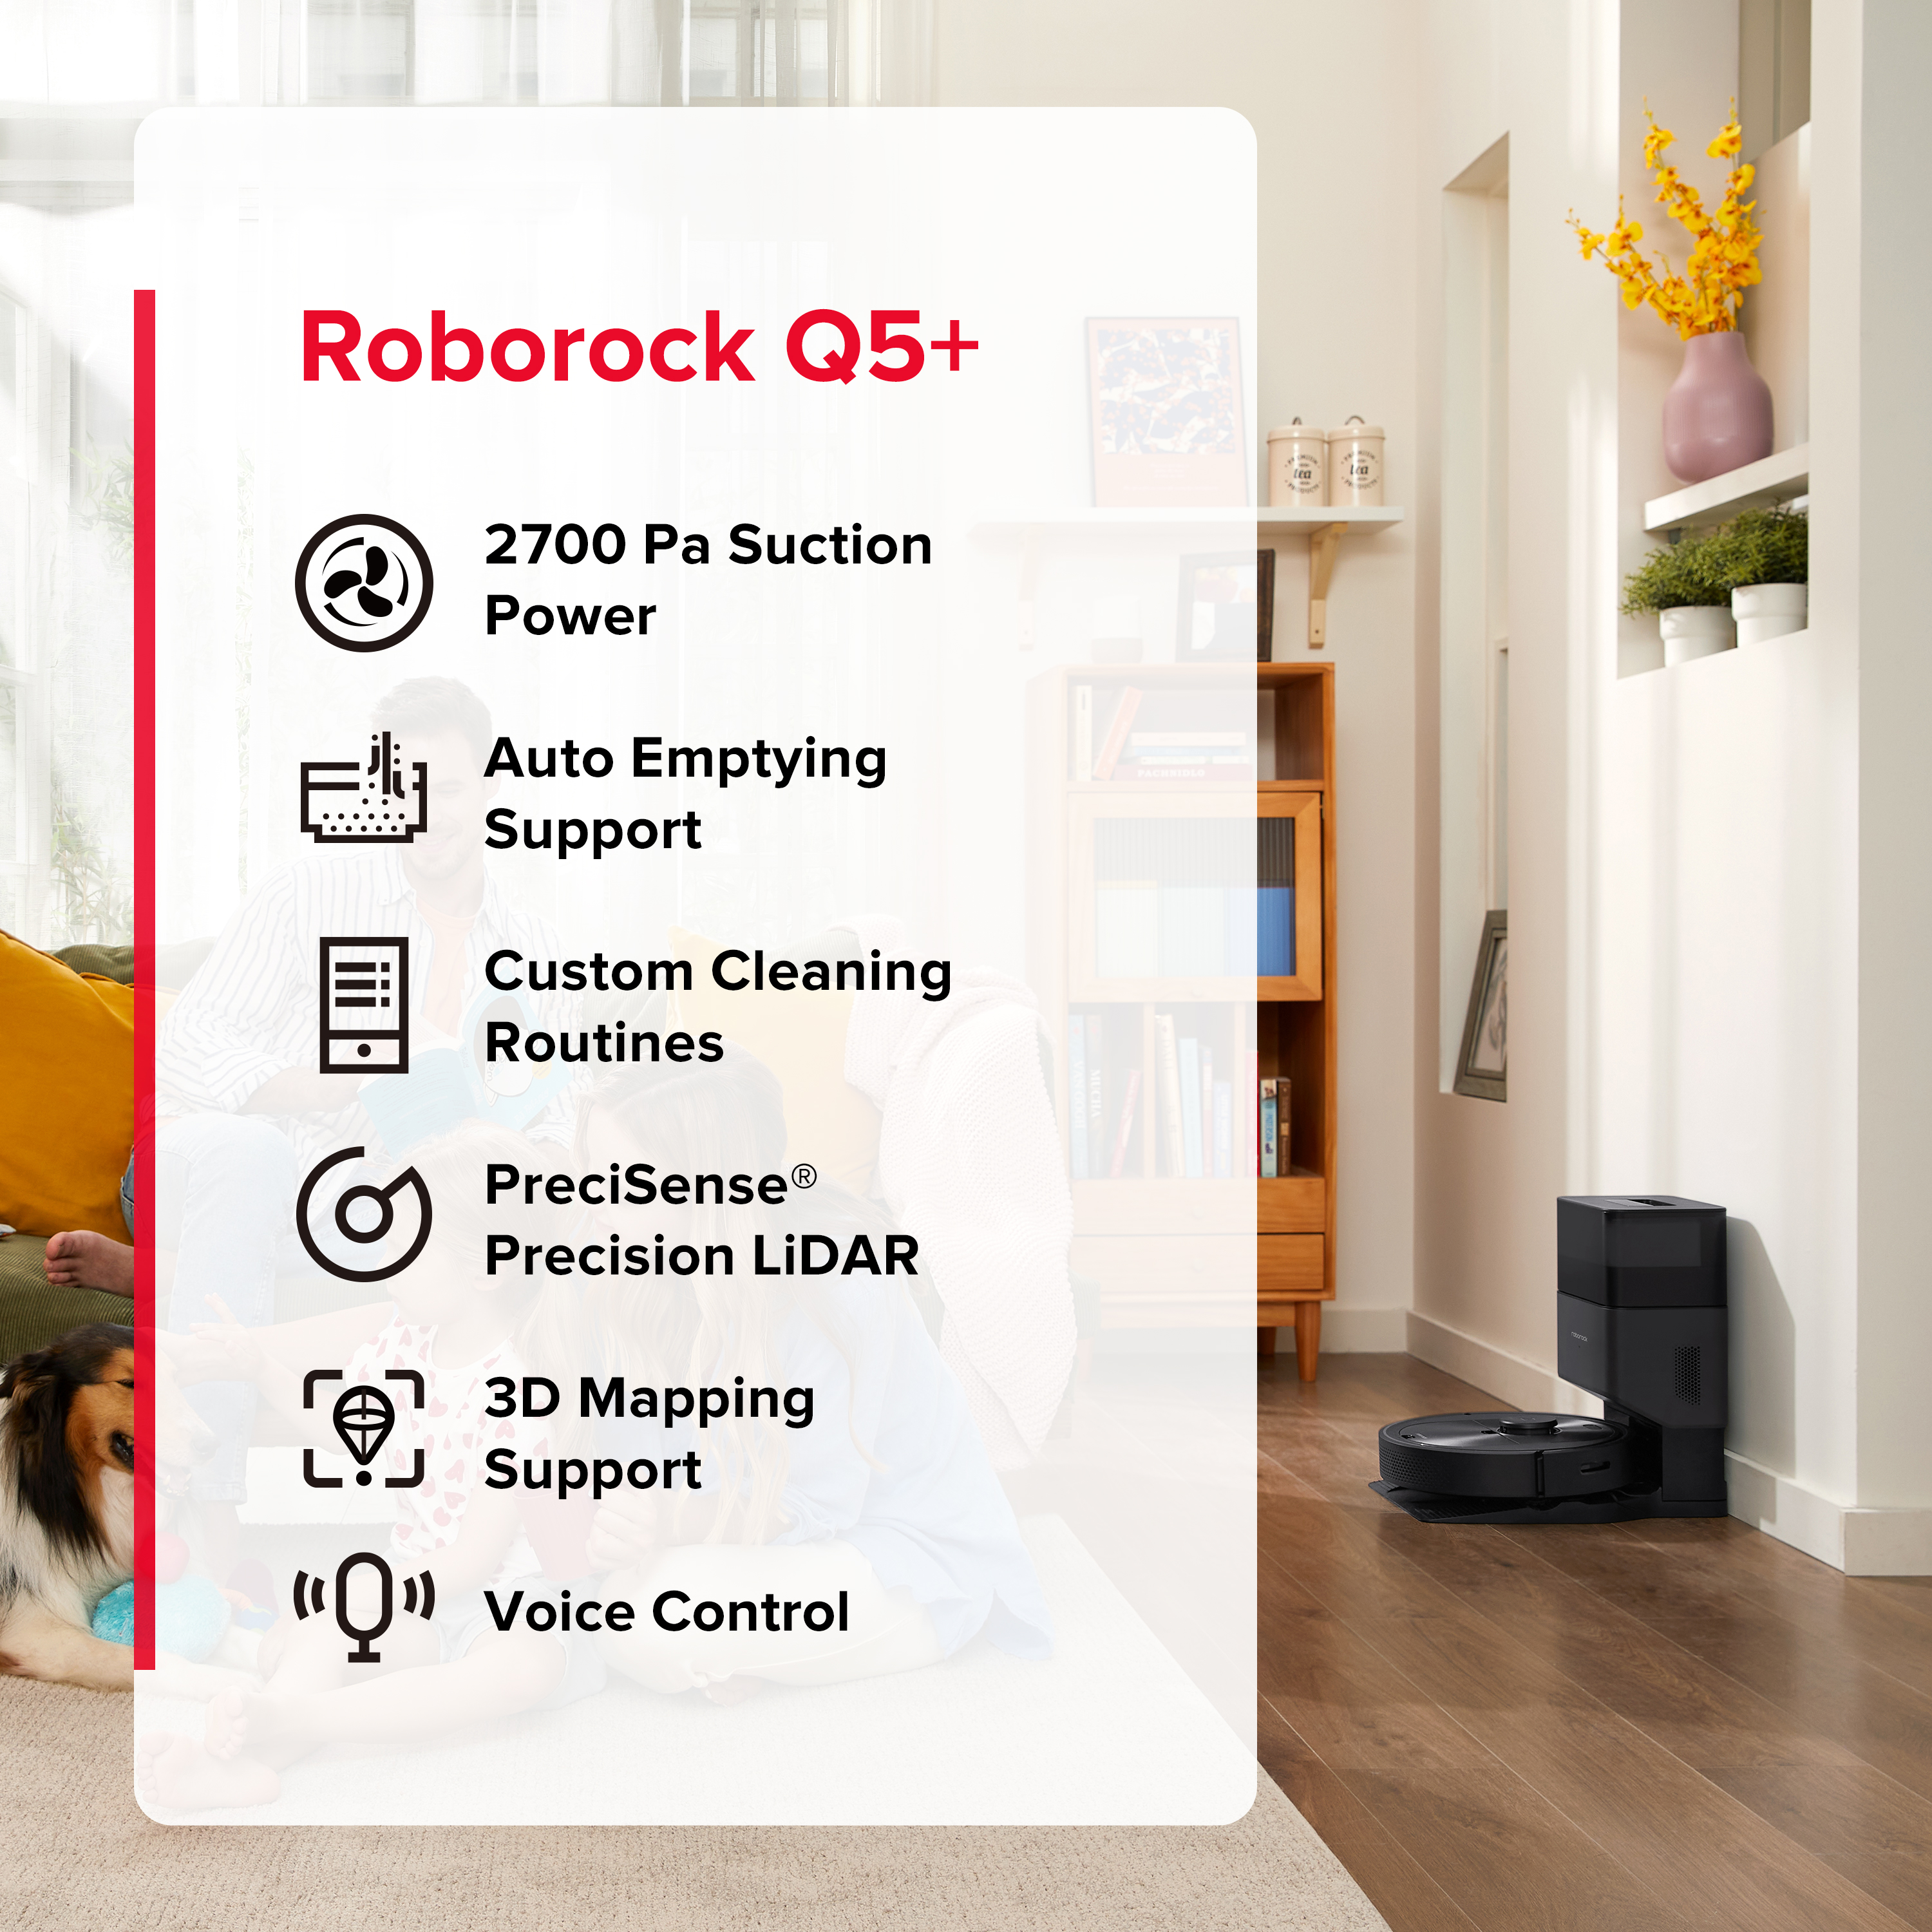 Roborock® Q5+ Auto Emptying Robot Vacuum Cleaner, 2700 Pa Suction Power, with App Control - image 2 of 15